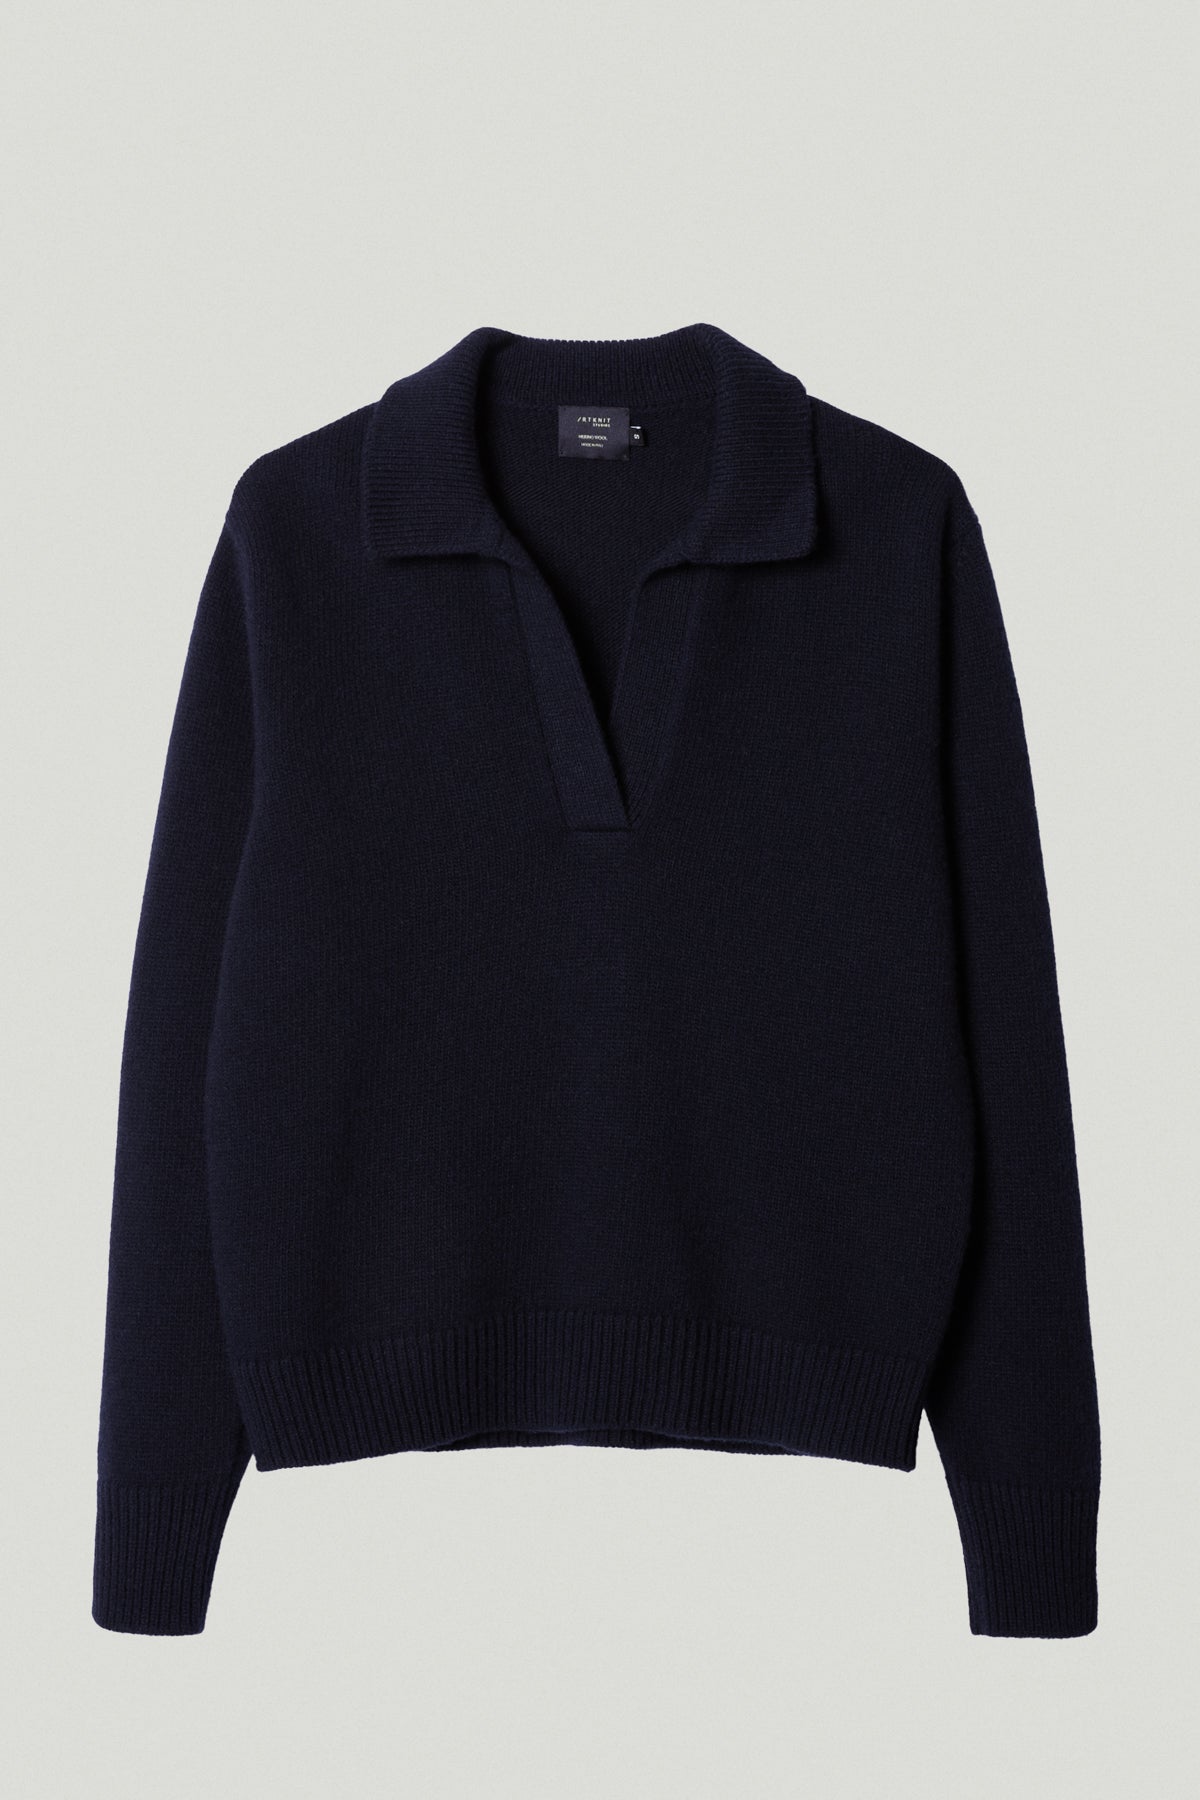 Blue Navy | The Woolen Vintage Polo